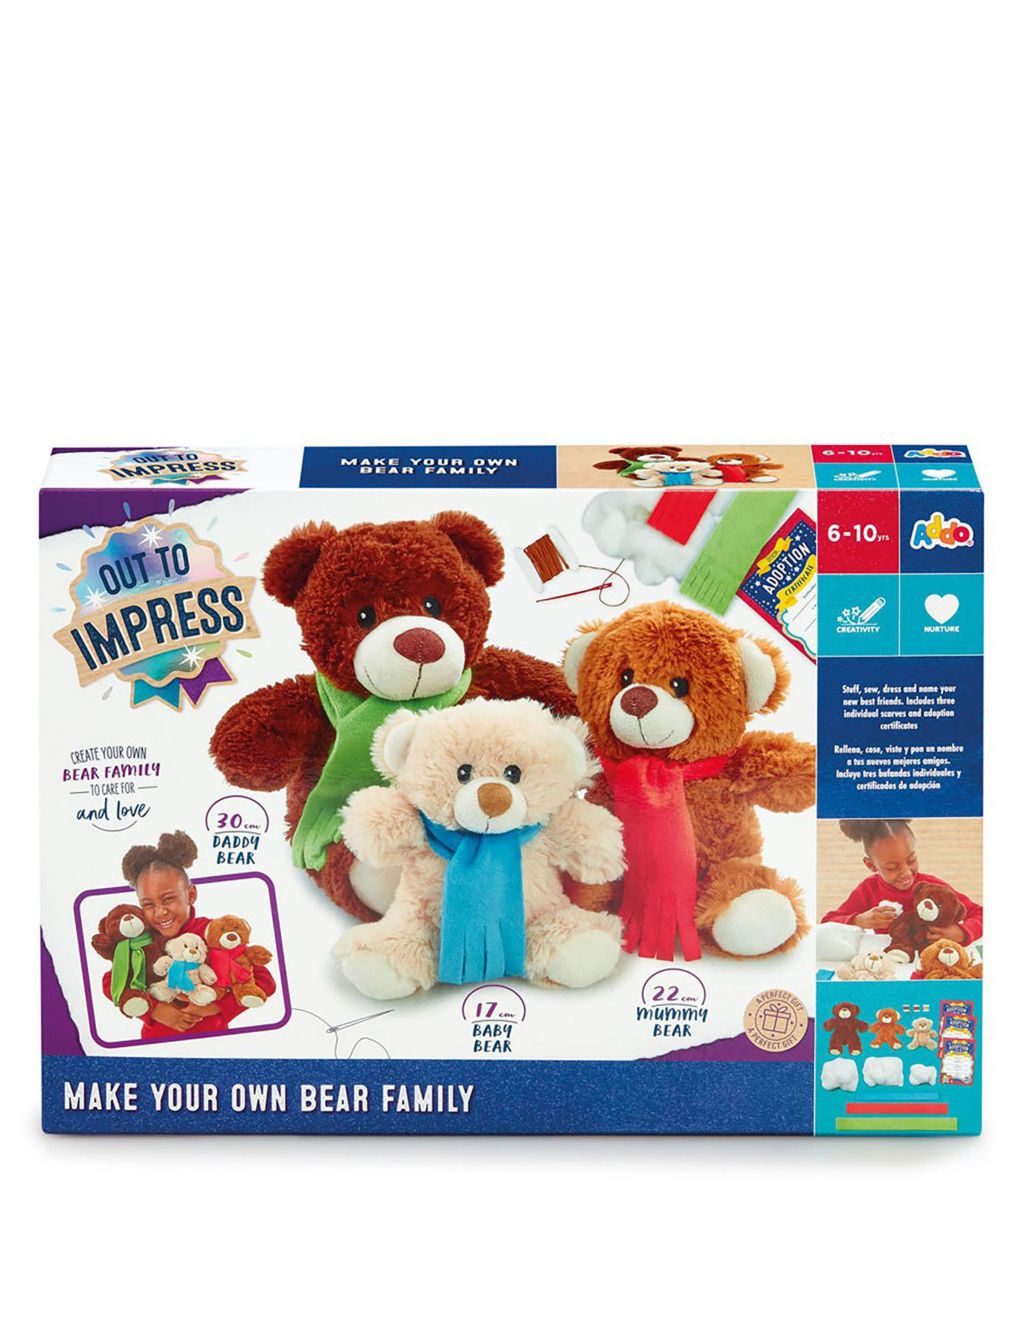 Make Your Own Bear Family (6-10 Yrs) image 1